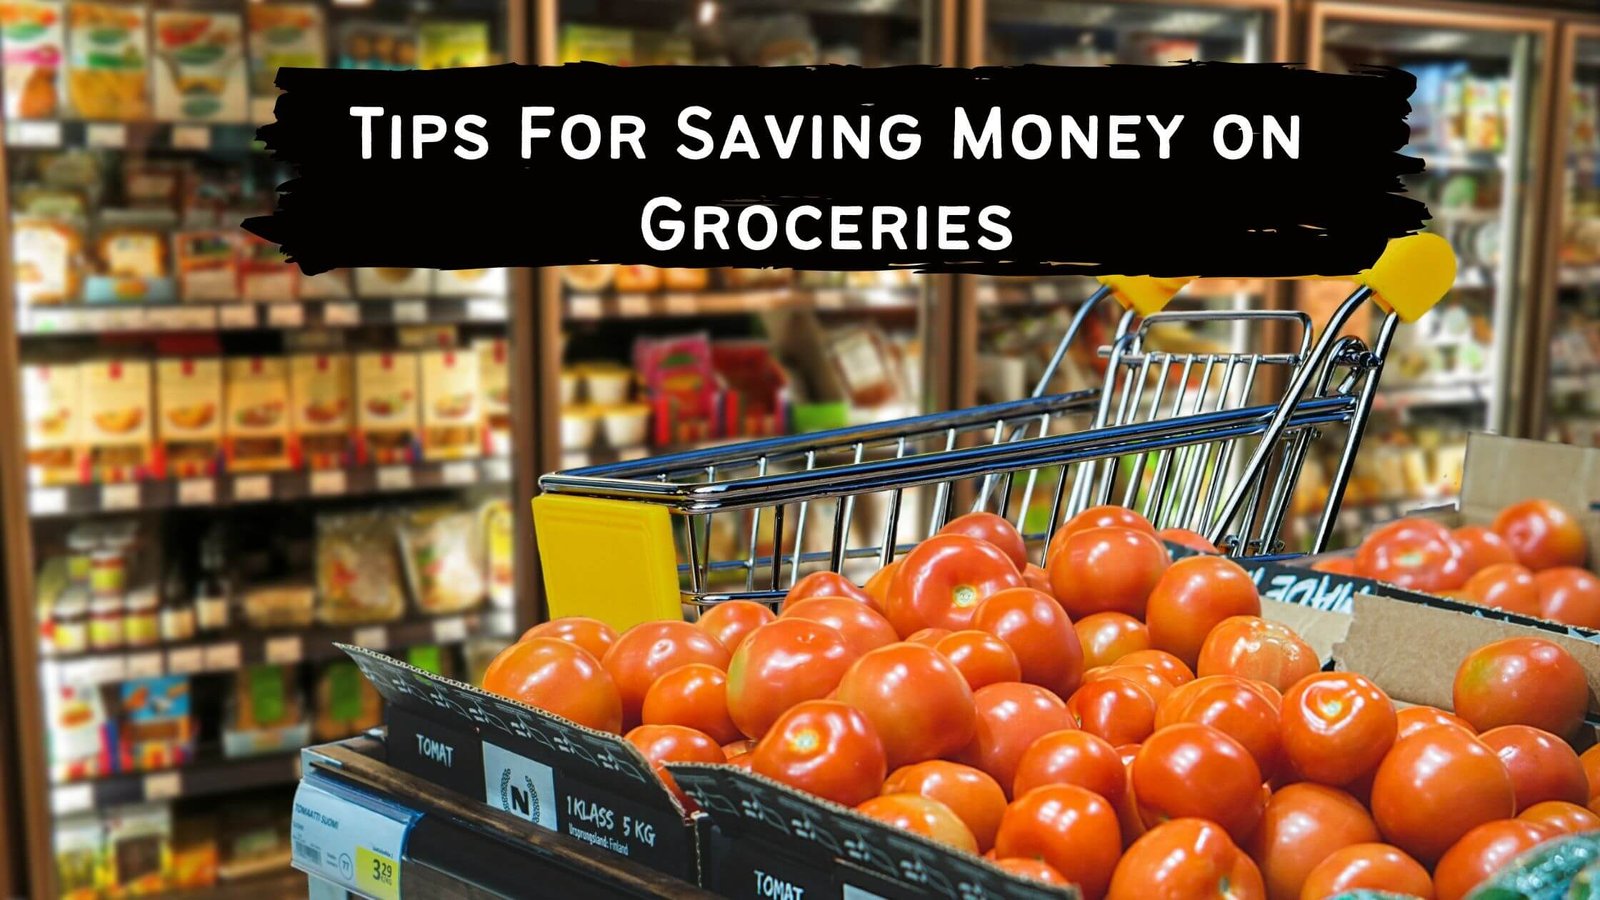 Tips For Saving Money on Groceries